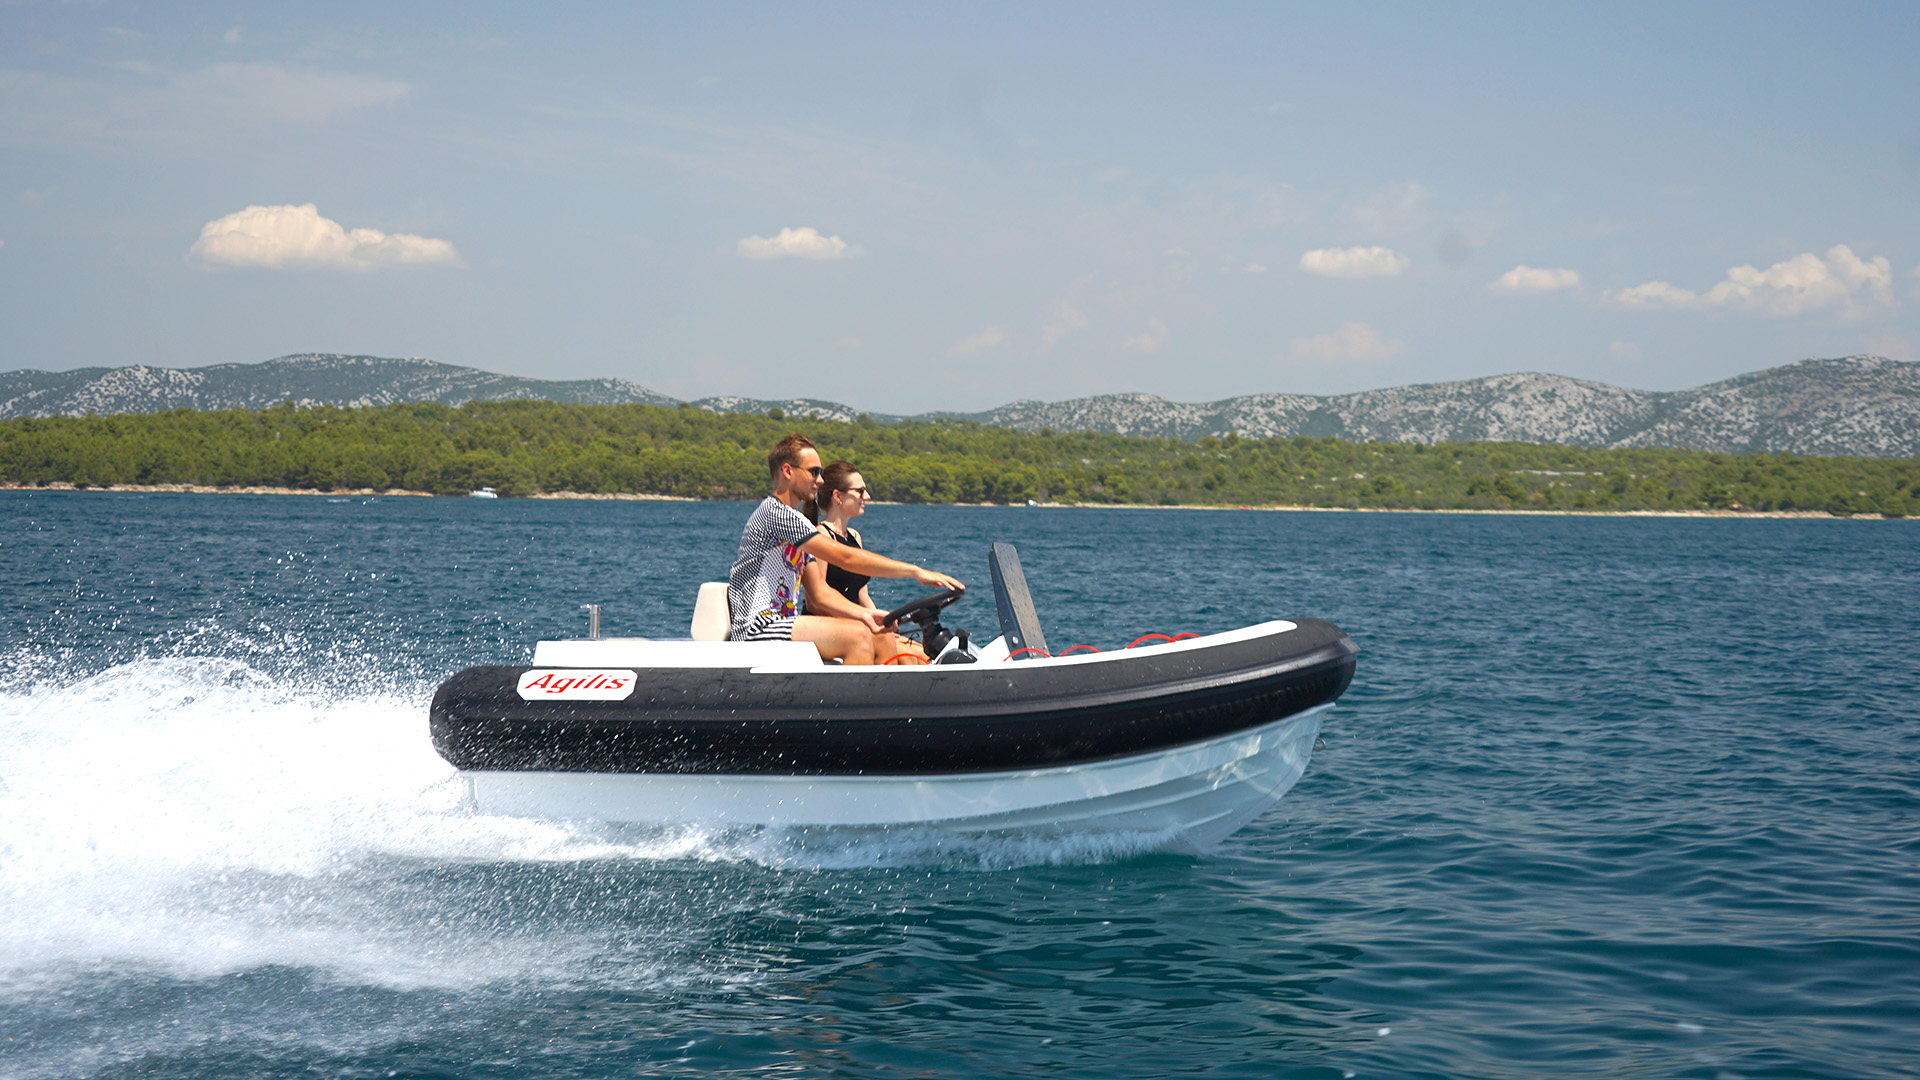 Agilis 355C - the tender boat engineered with the highest standards